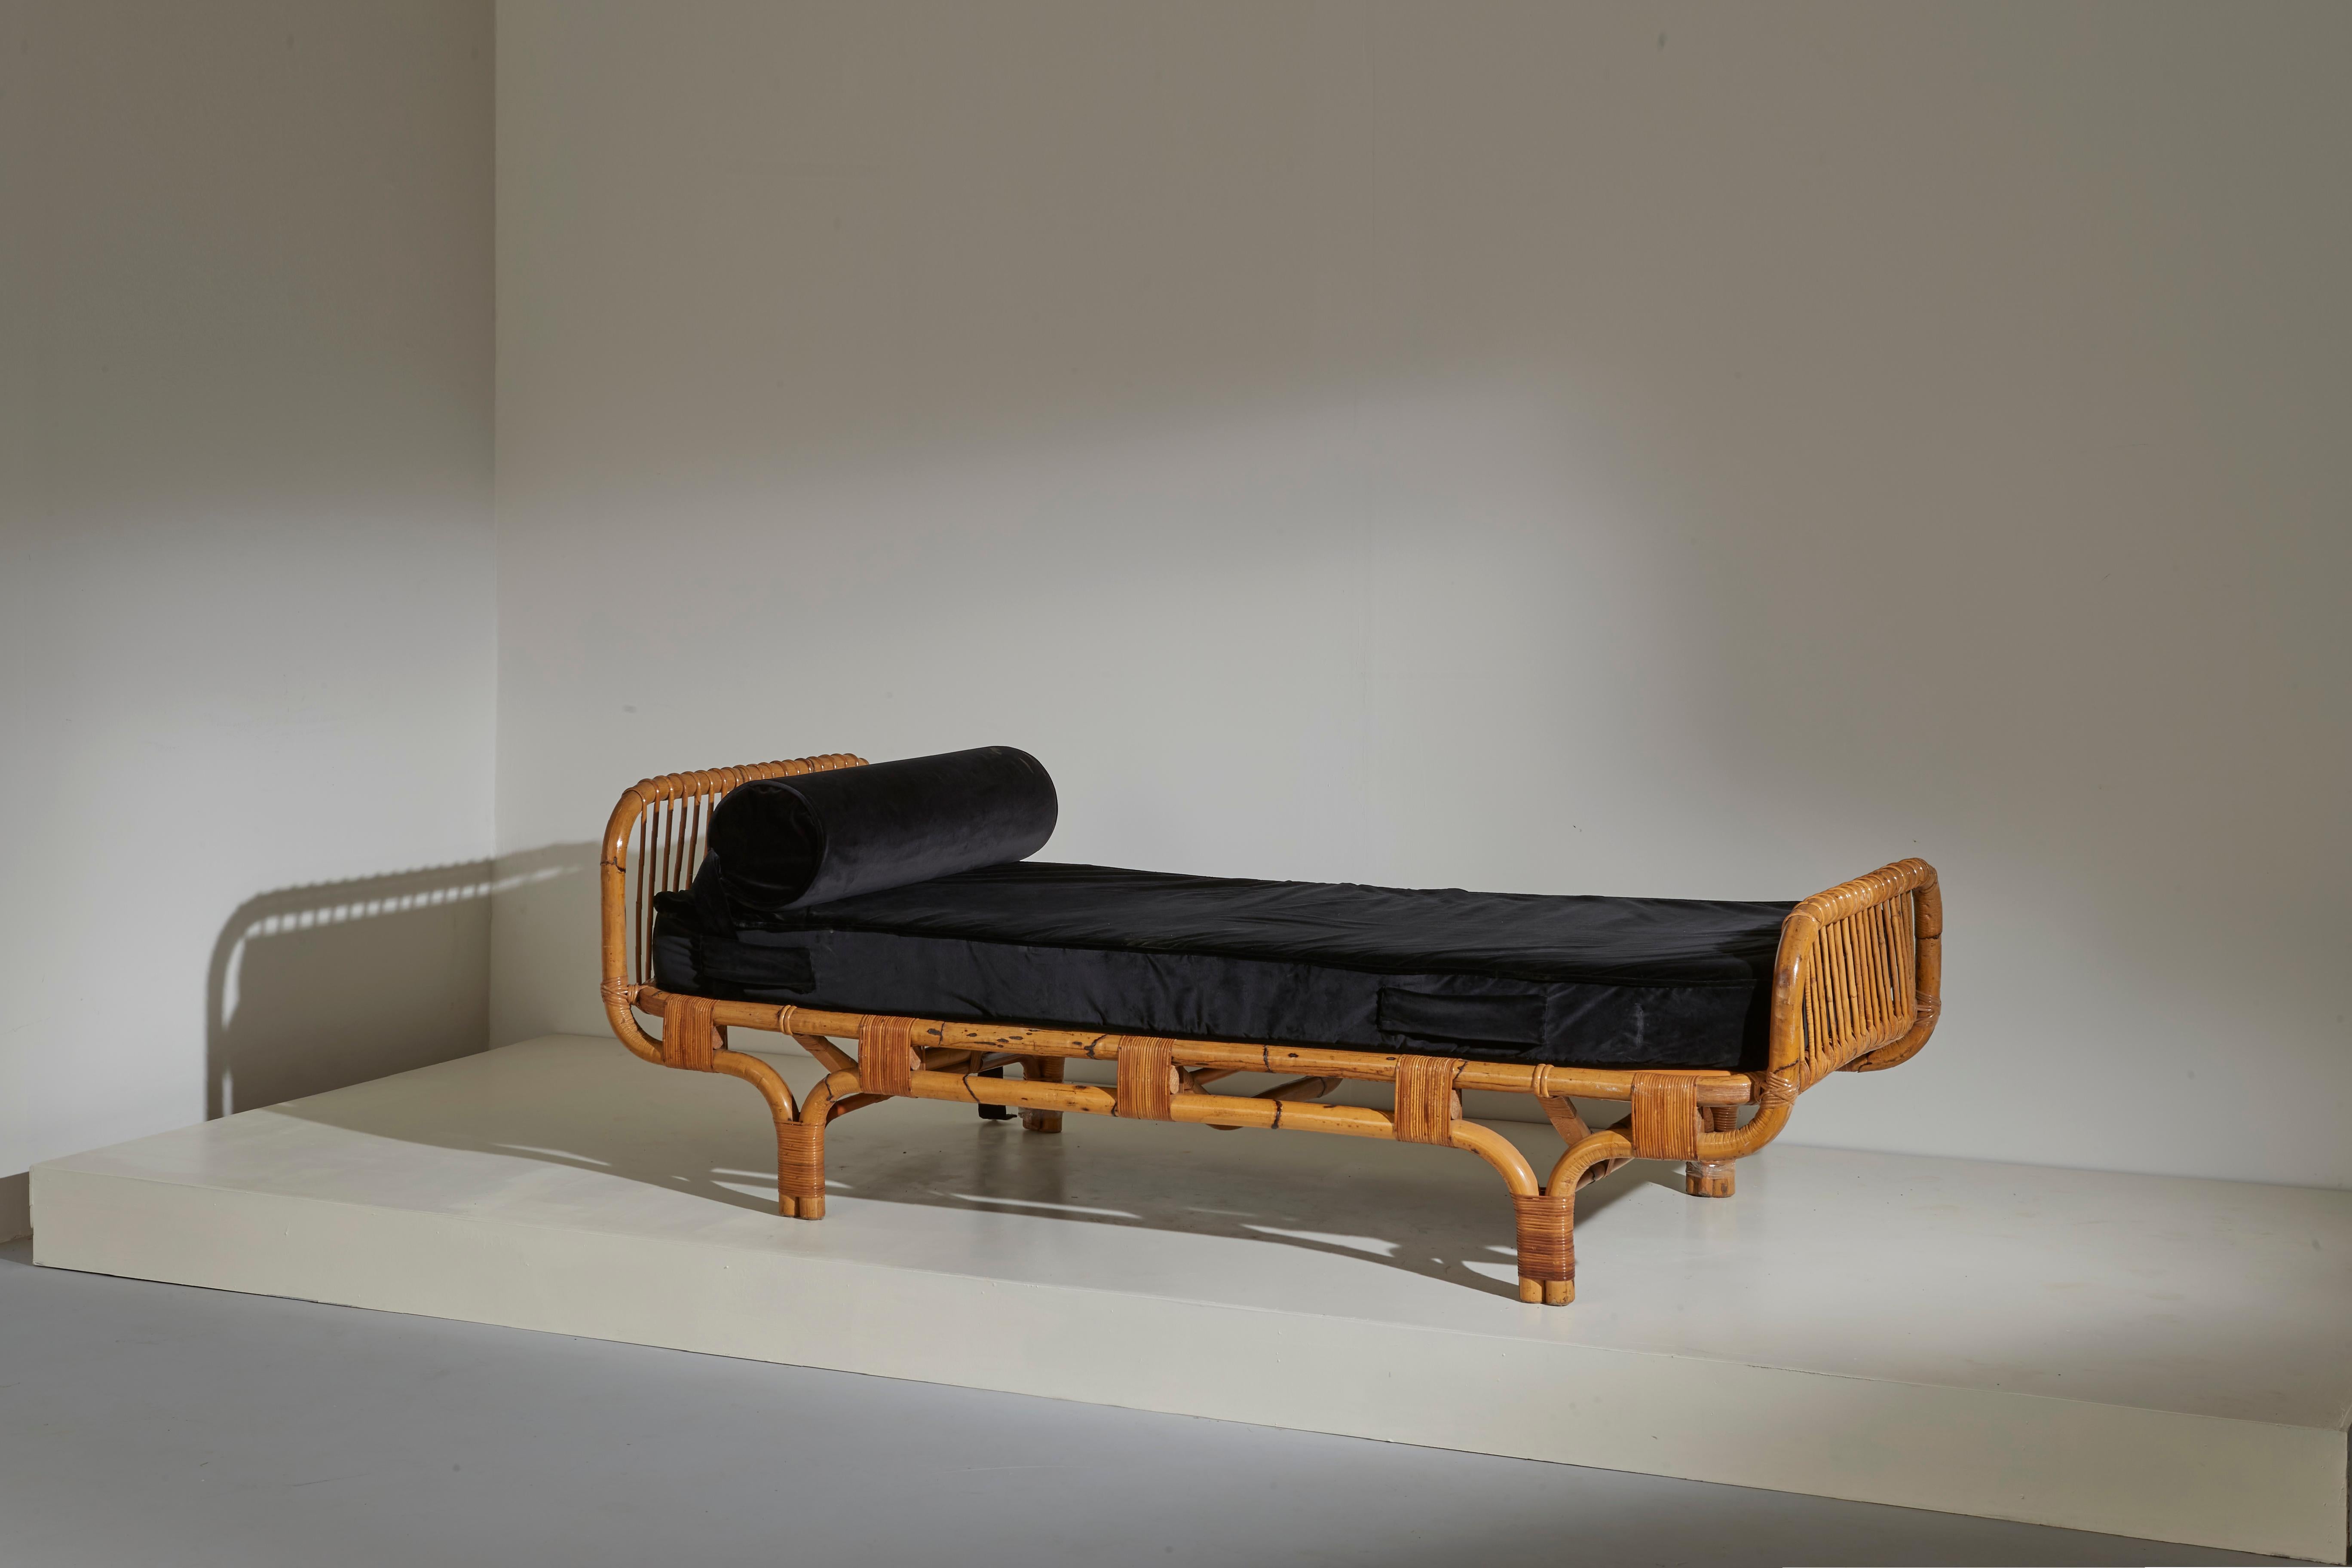 A beautiful daybed designed by Tito Agnoli and produced by Bonacina in the 1960s with sculptural bamboo headrest and footrest. In its original excellent vintage condition with a great patina.

Dimensions: 207x90x60cm (DxWxH).

Conditions: Very